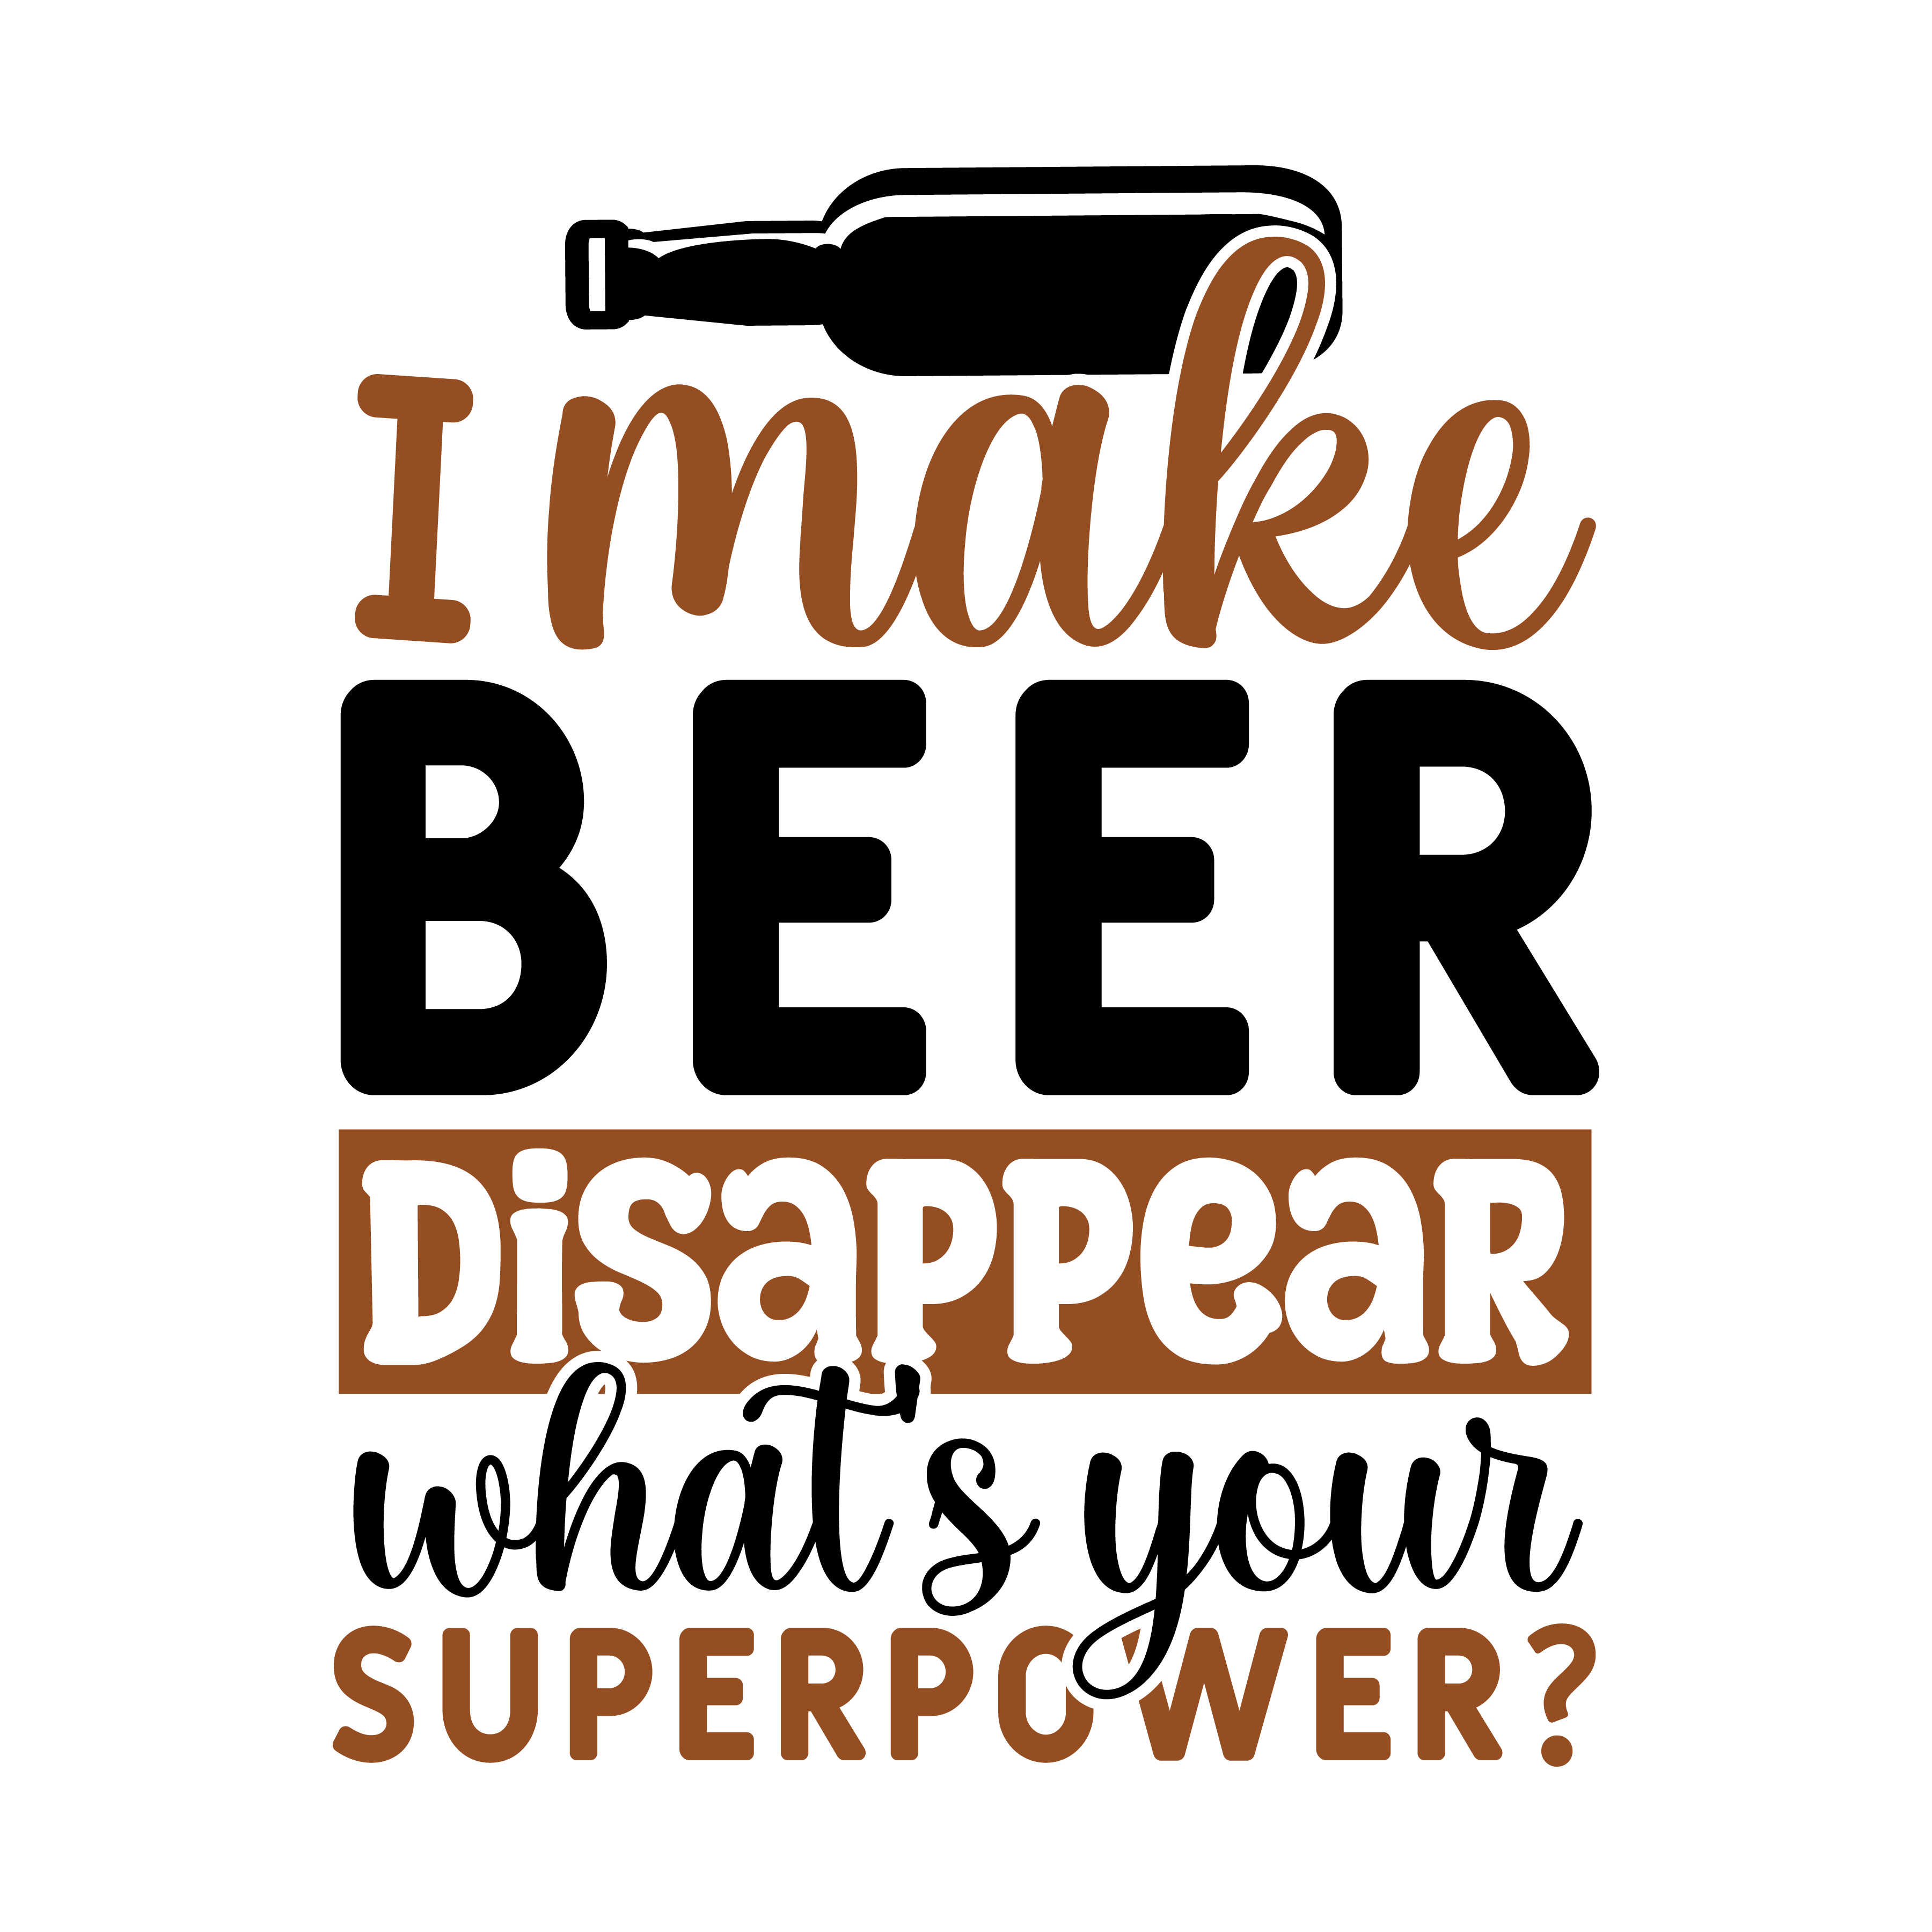 i make beer disappear whats your superpower, beer quotes, beer sayings, Cricut designs, free, clip art, svg file, template, pattern, stencil, silhouette, cut file, design space, vector, shirt, cup, DIY crafts and projects, embroidery